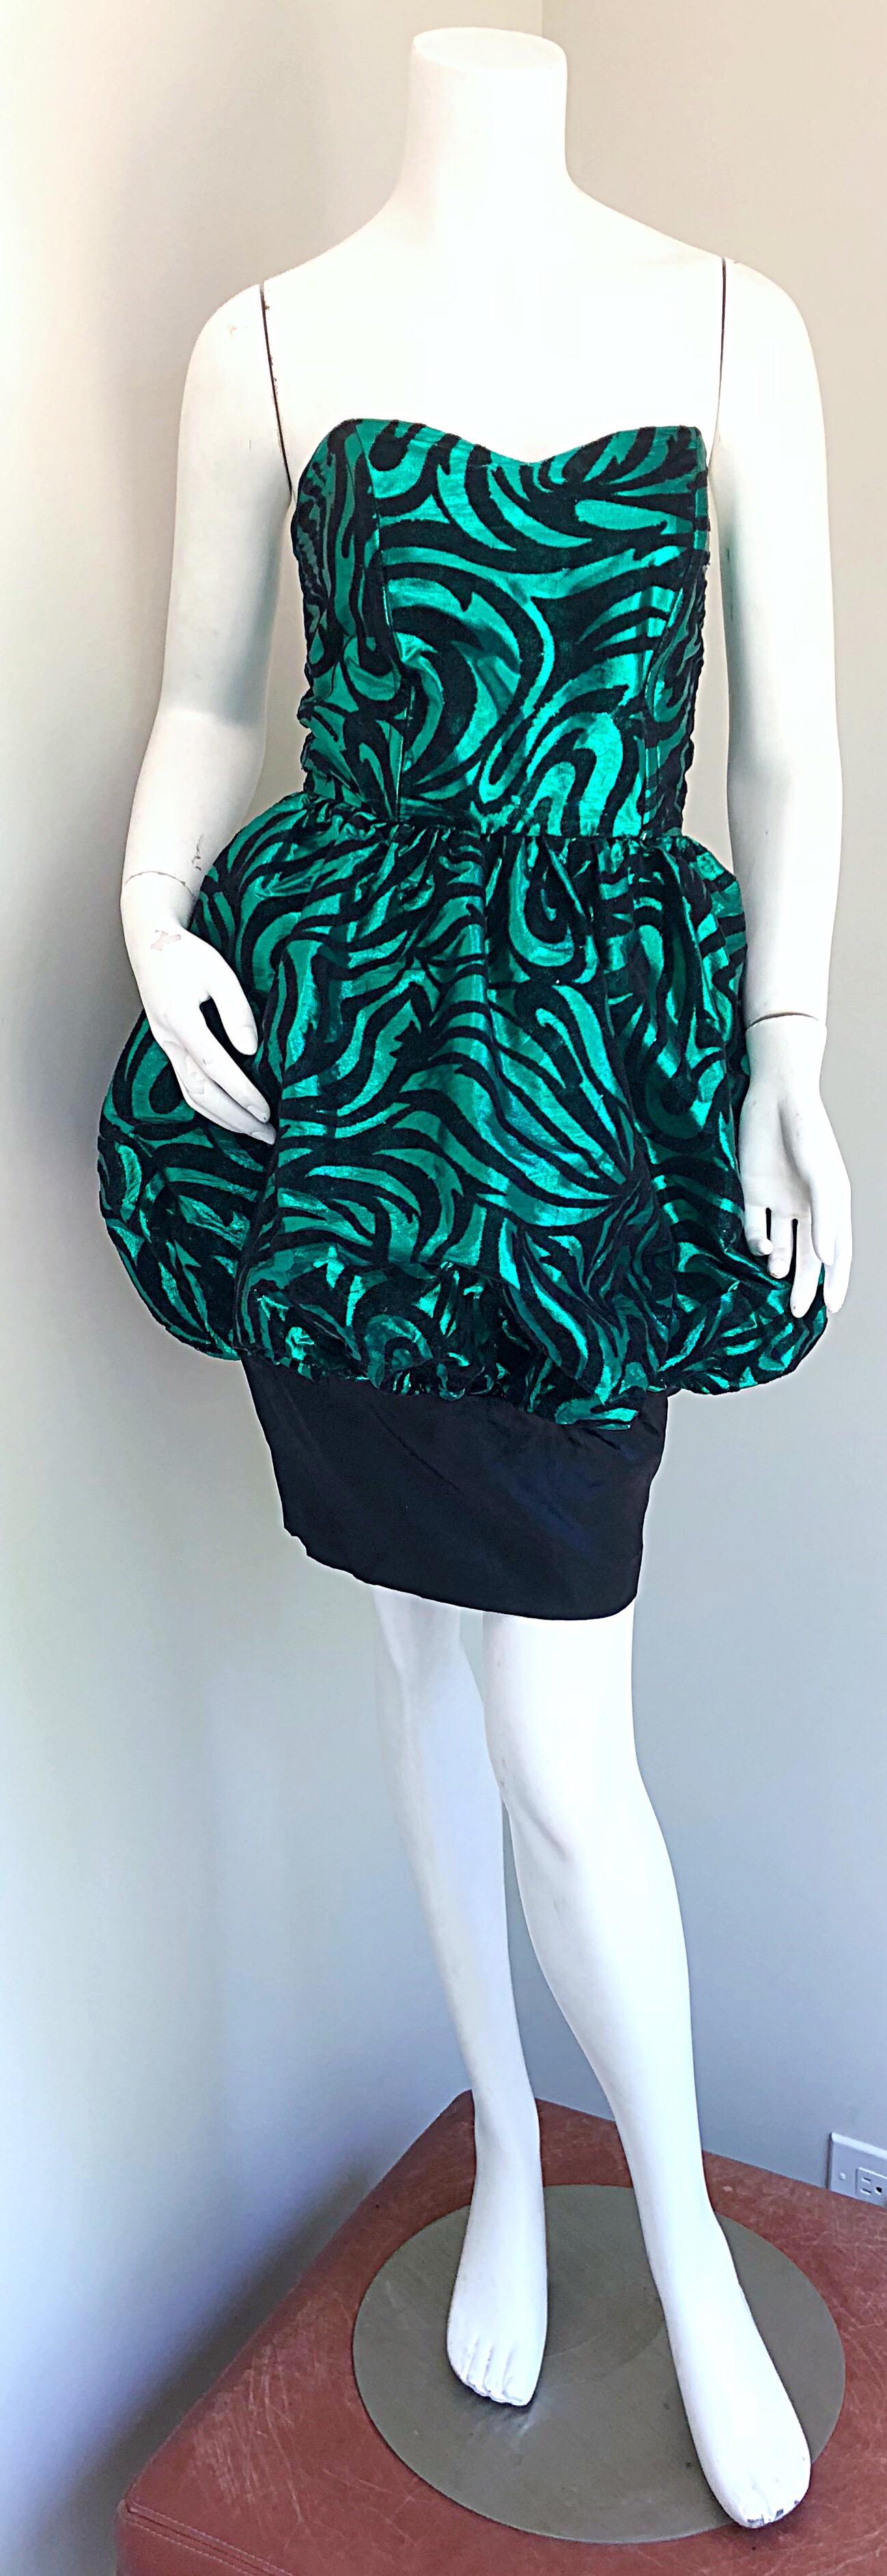 Fabulous 1980s VICKY VAUGHN green and black abstract print strapless pouf dress! Features a gorgeous emerald green metallic background with black abstract prints throughout. Fitted bonded bodice with a full bubble pouf skirt. Hidden zipper up the